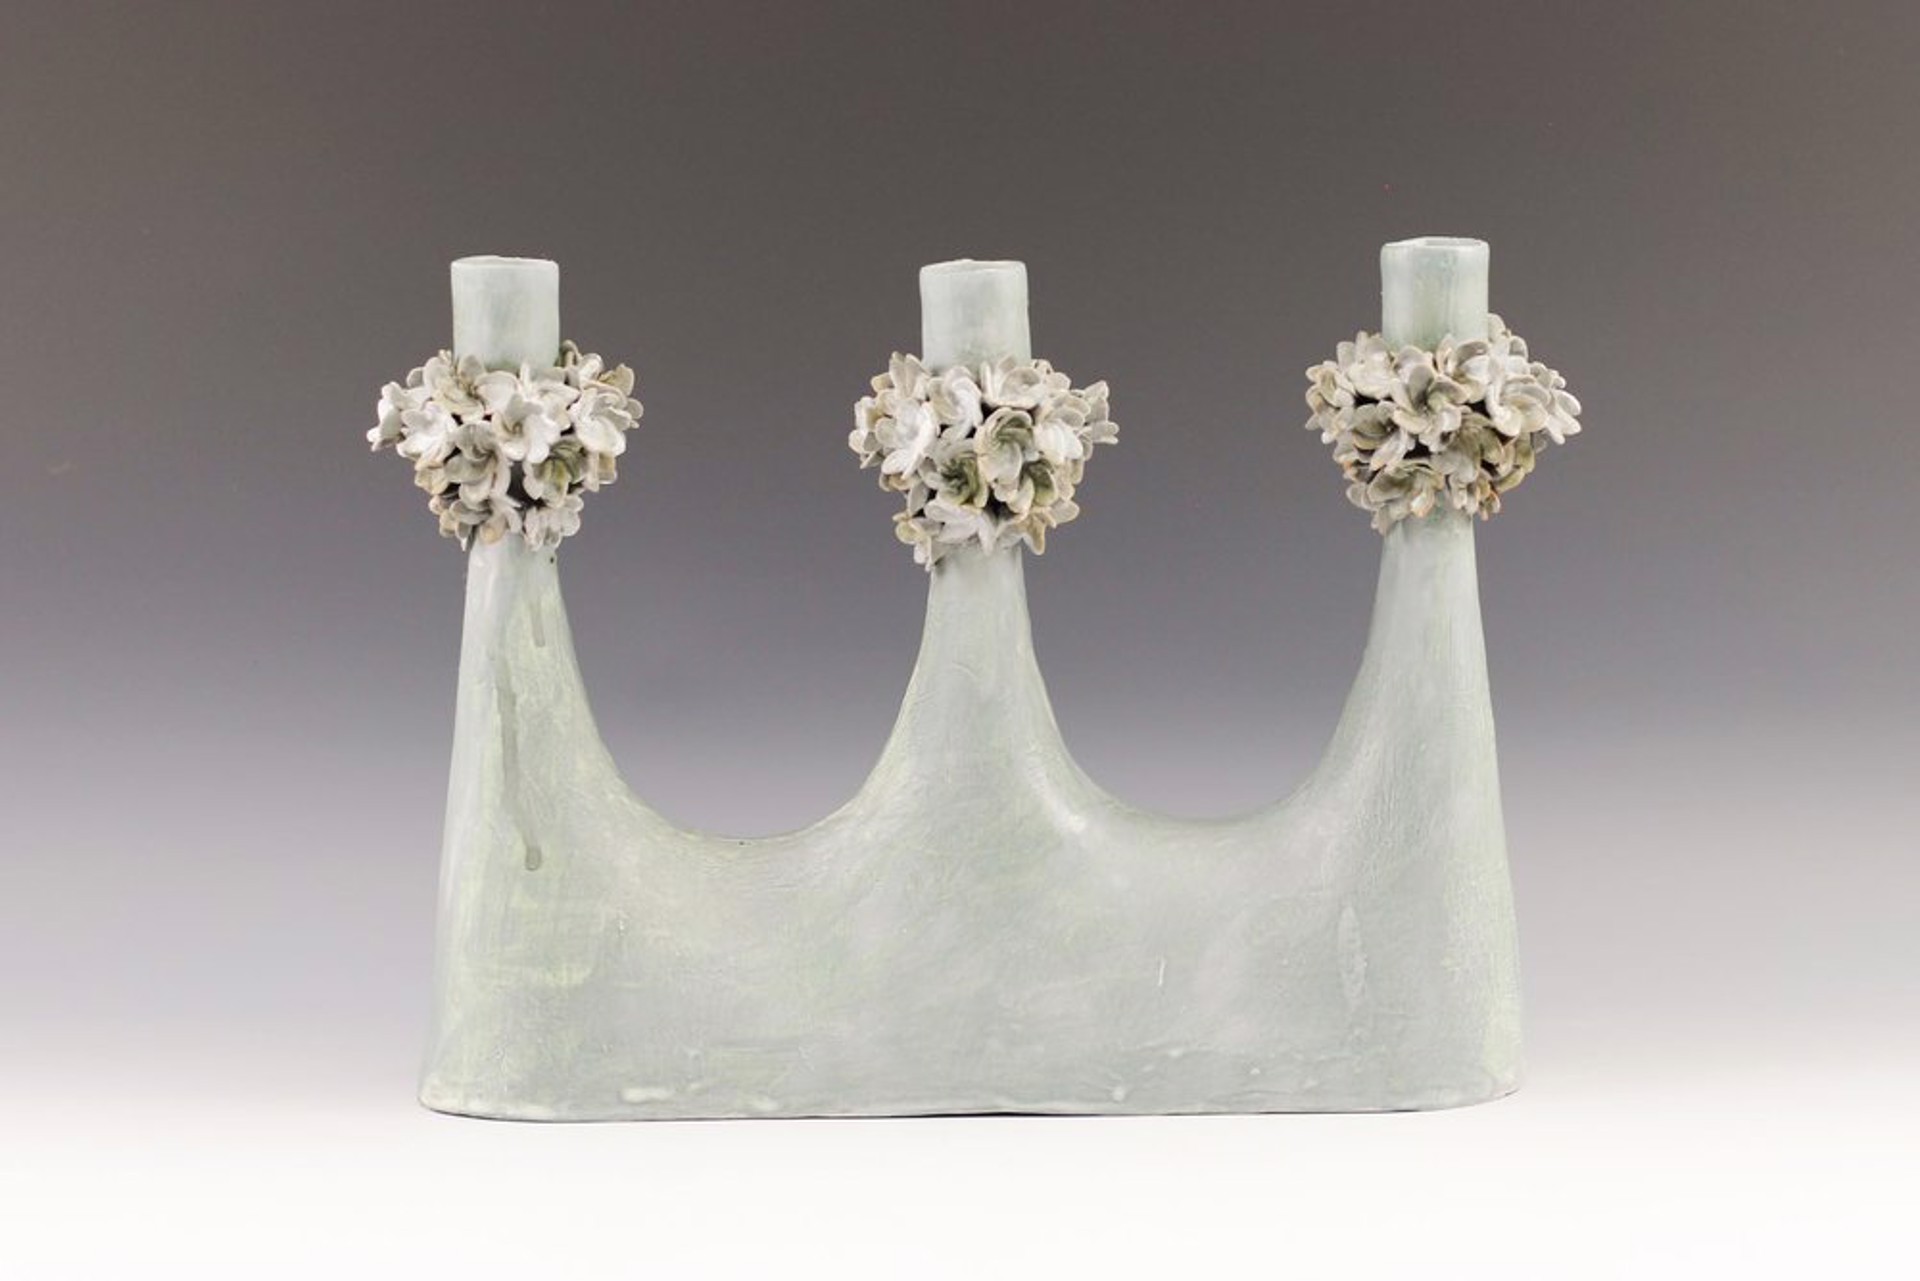 Candle Holder with Flowers - 3 Candles by Maggie Jaszczak